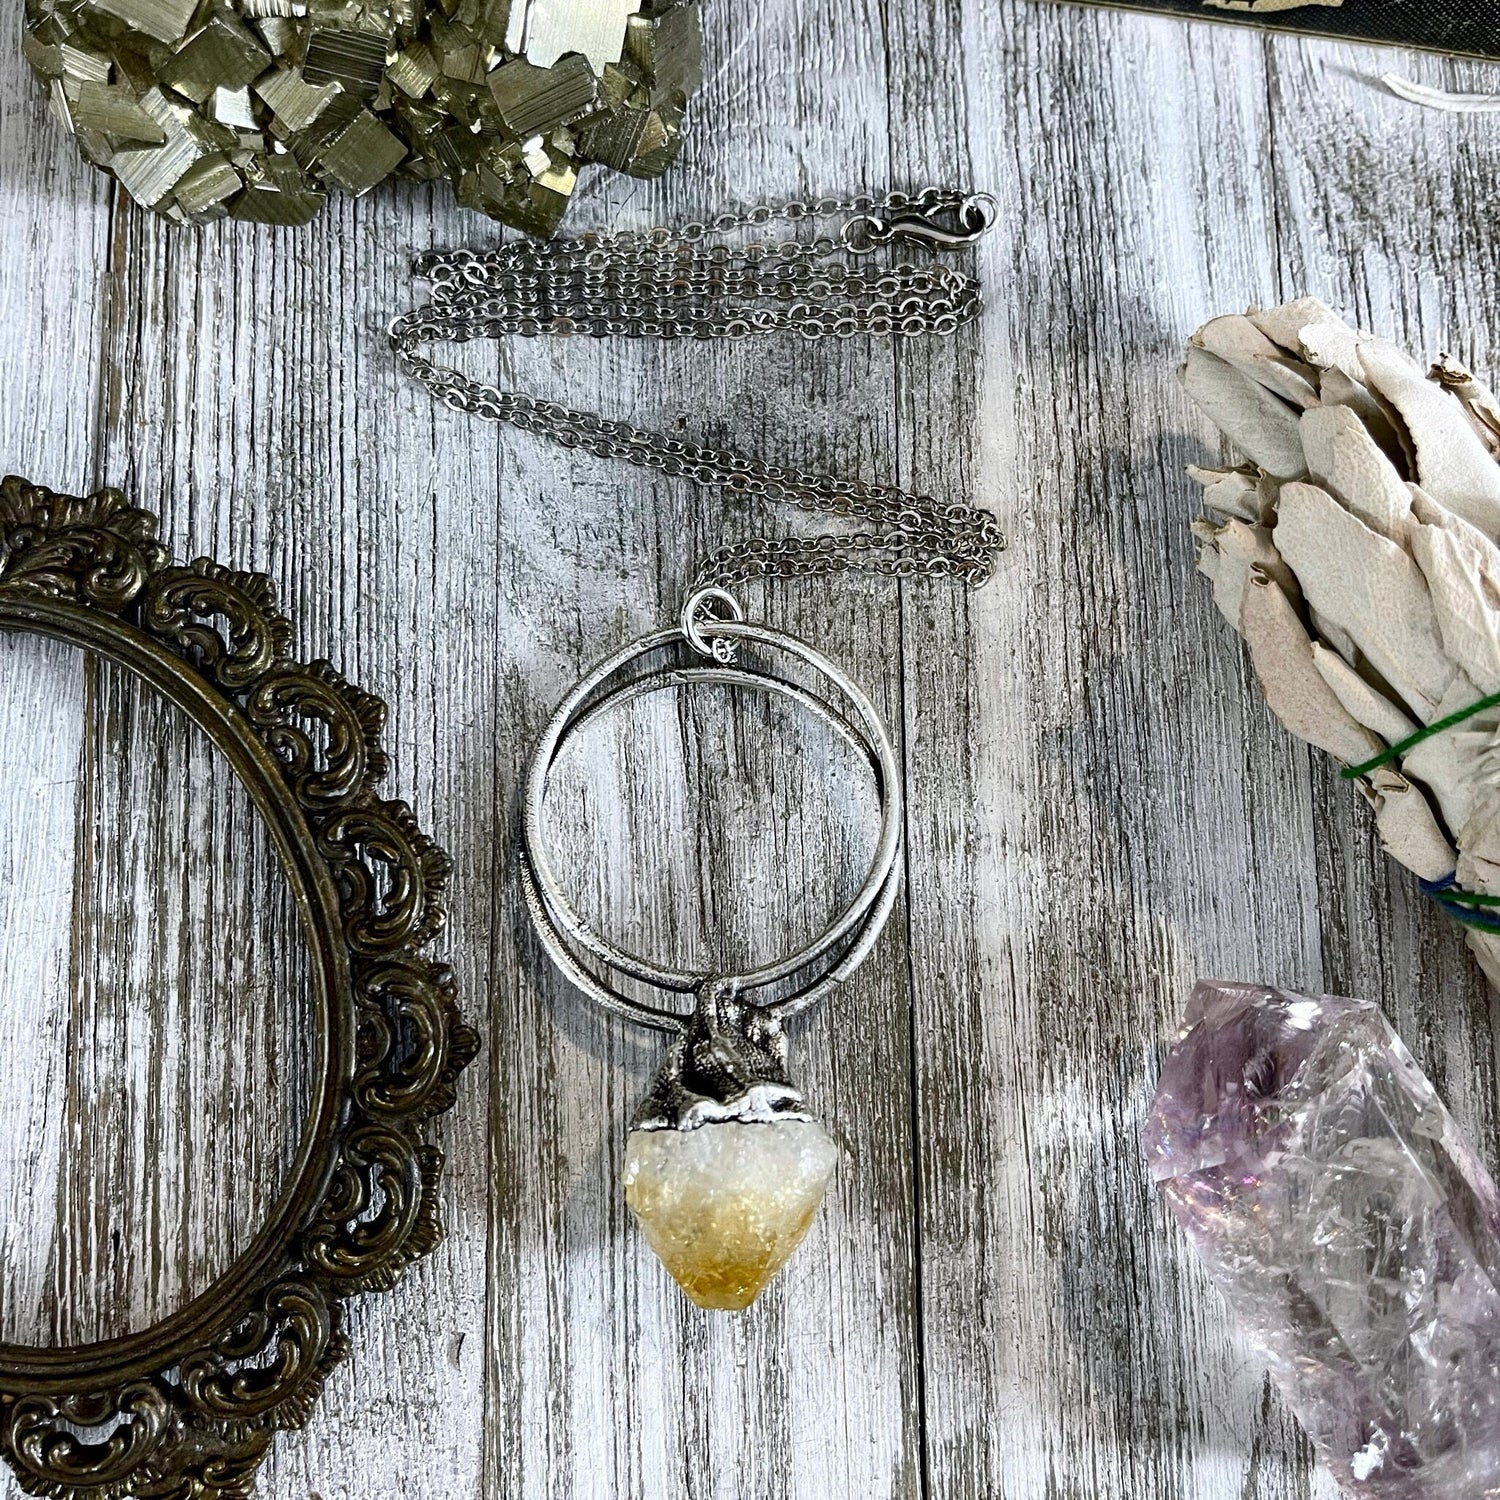 Large Citrine Necklace / Big Crystal Necklace Silver / Foxlark Collection - One of a Kind